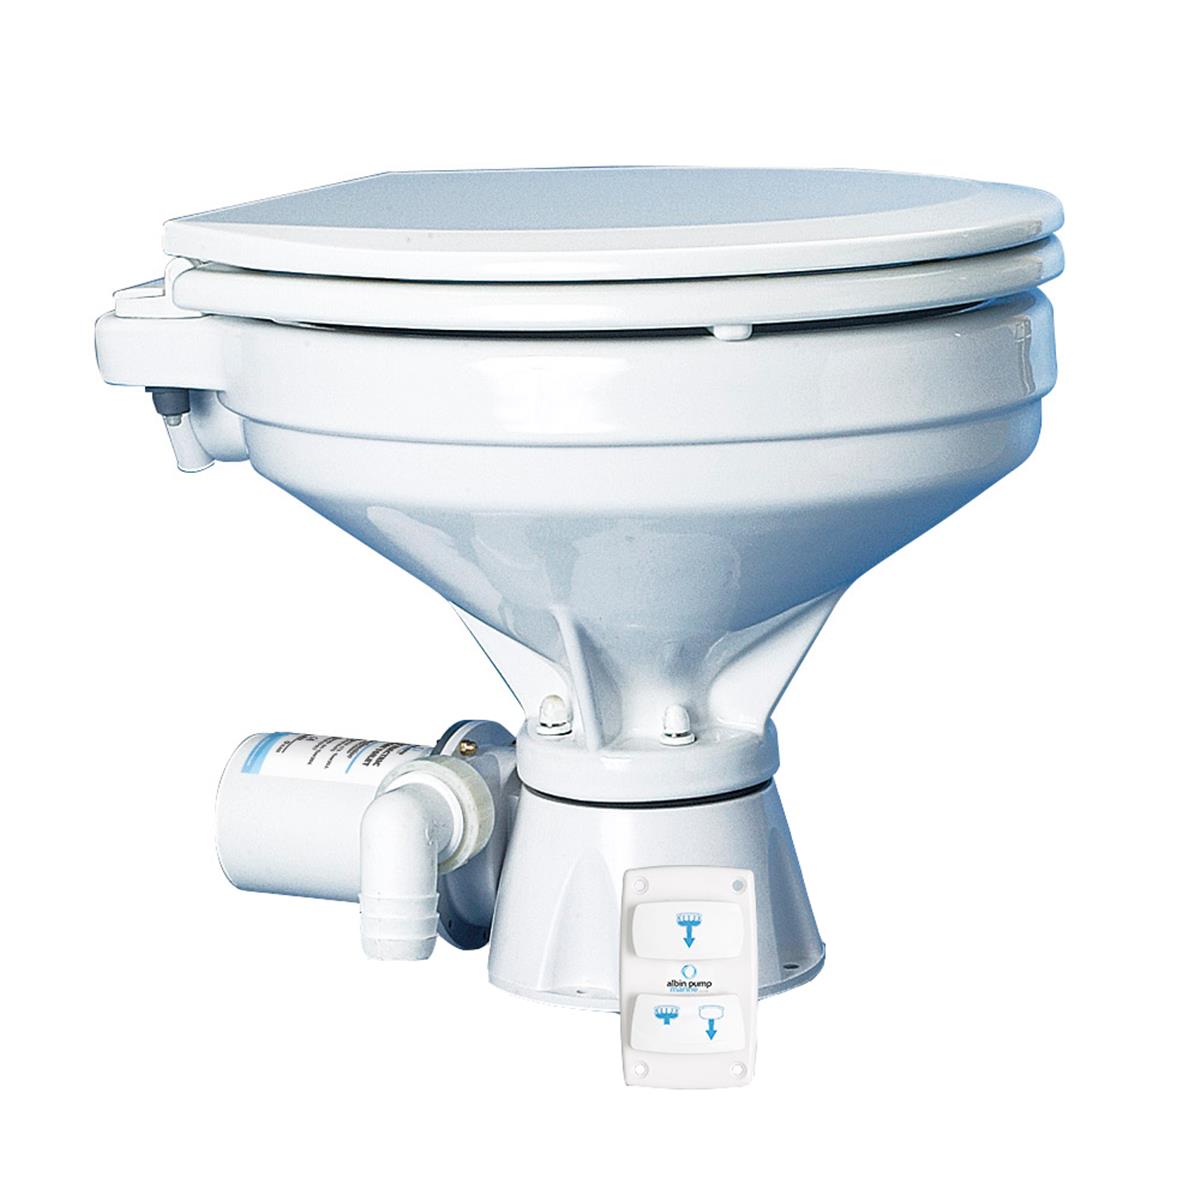 Picture of Albin Pump Marine 07-03-012 Toilet Silent Electric Comfort - 12V